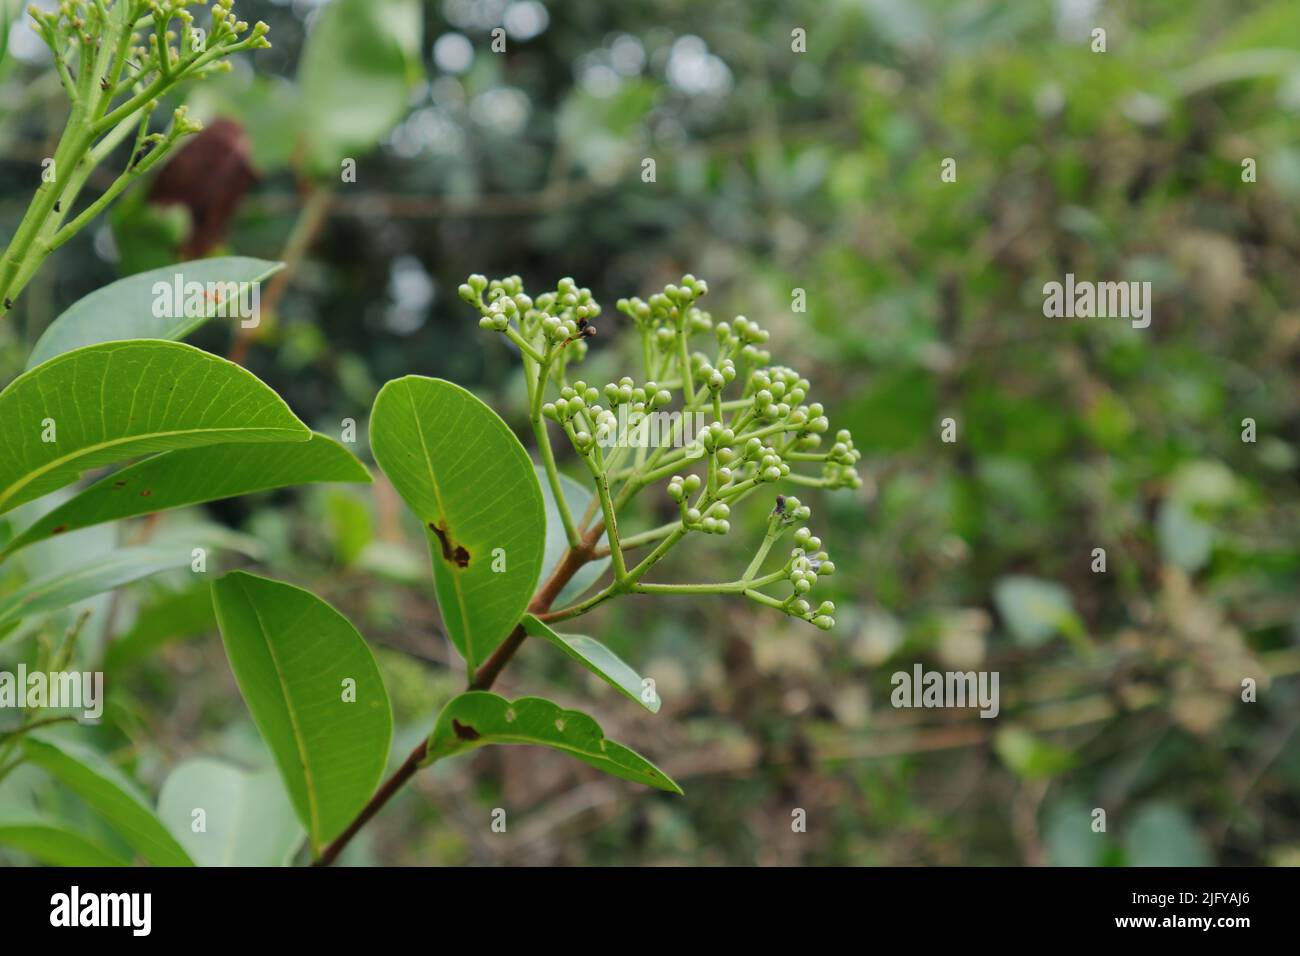 Floral bouquet ready to bloom from Syzygium Caryophyllatum buds with leaves. Stock Photo